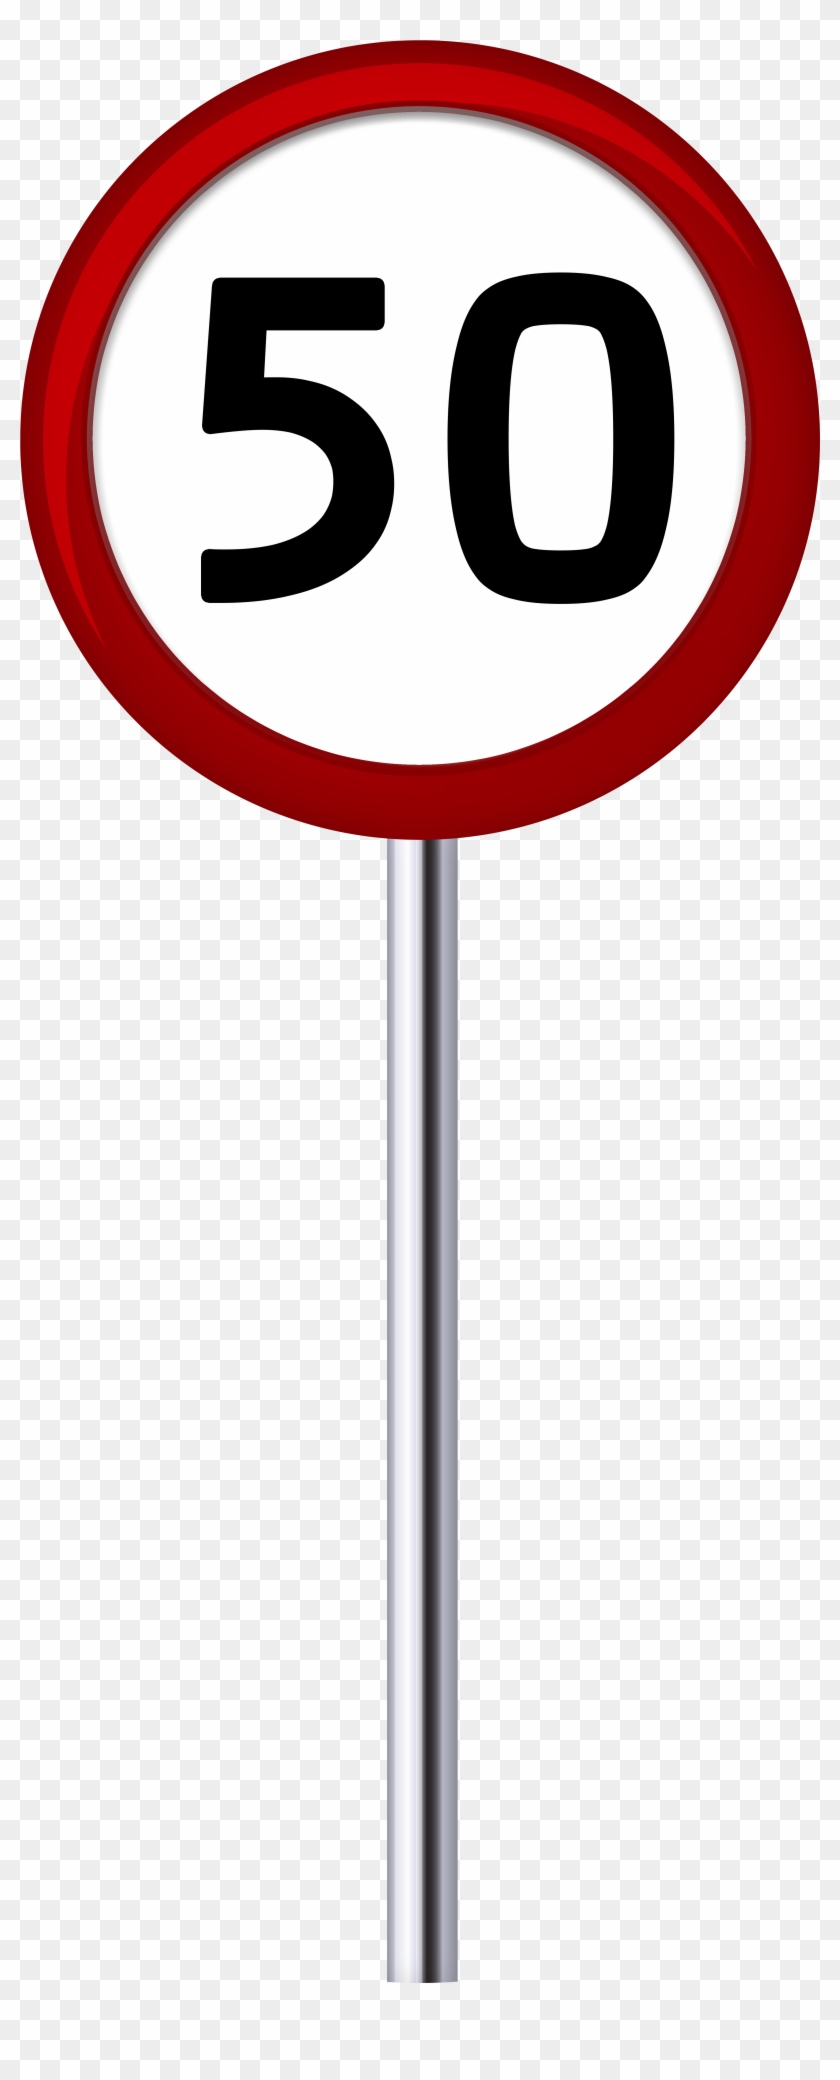 Traffic Sign Speed Limit 50 Png Clip Art - Traffic Sign Speed Limit 50 Png Clip Art #1480227